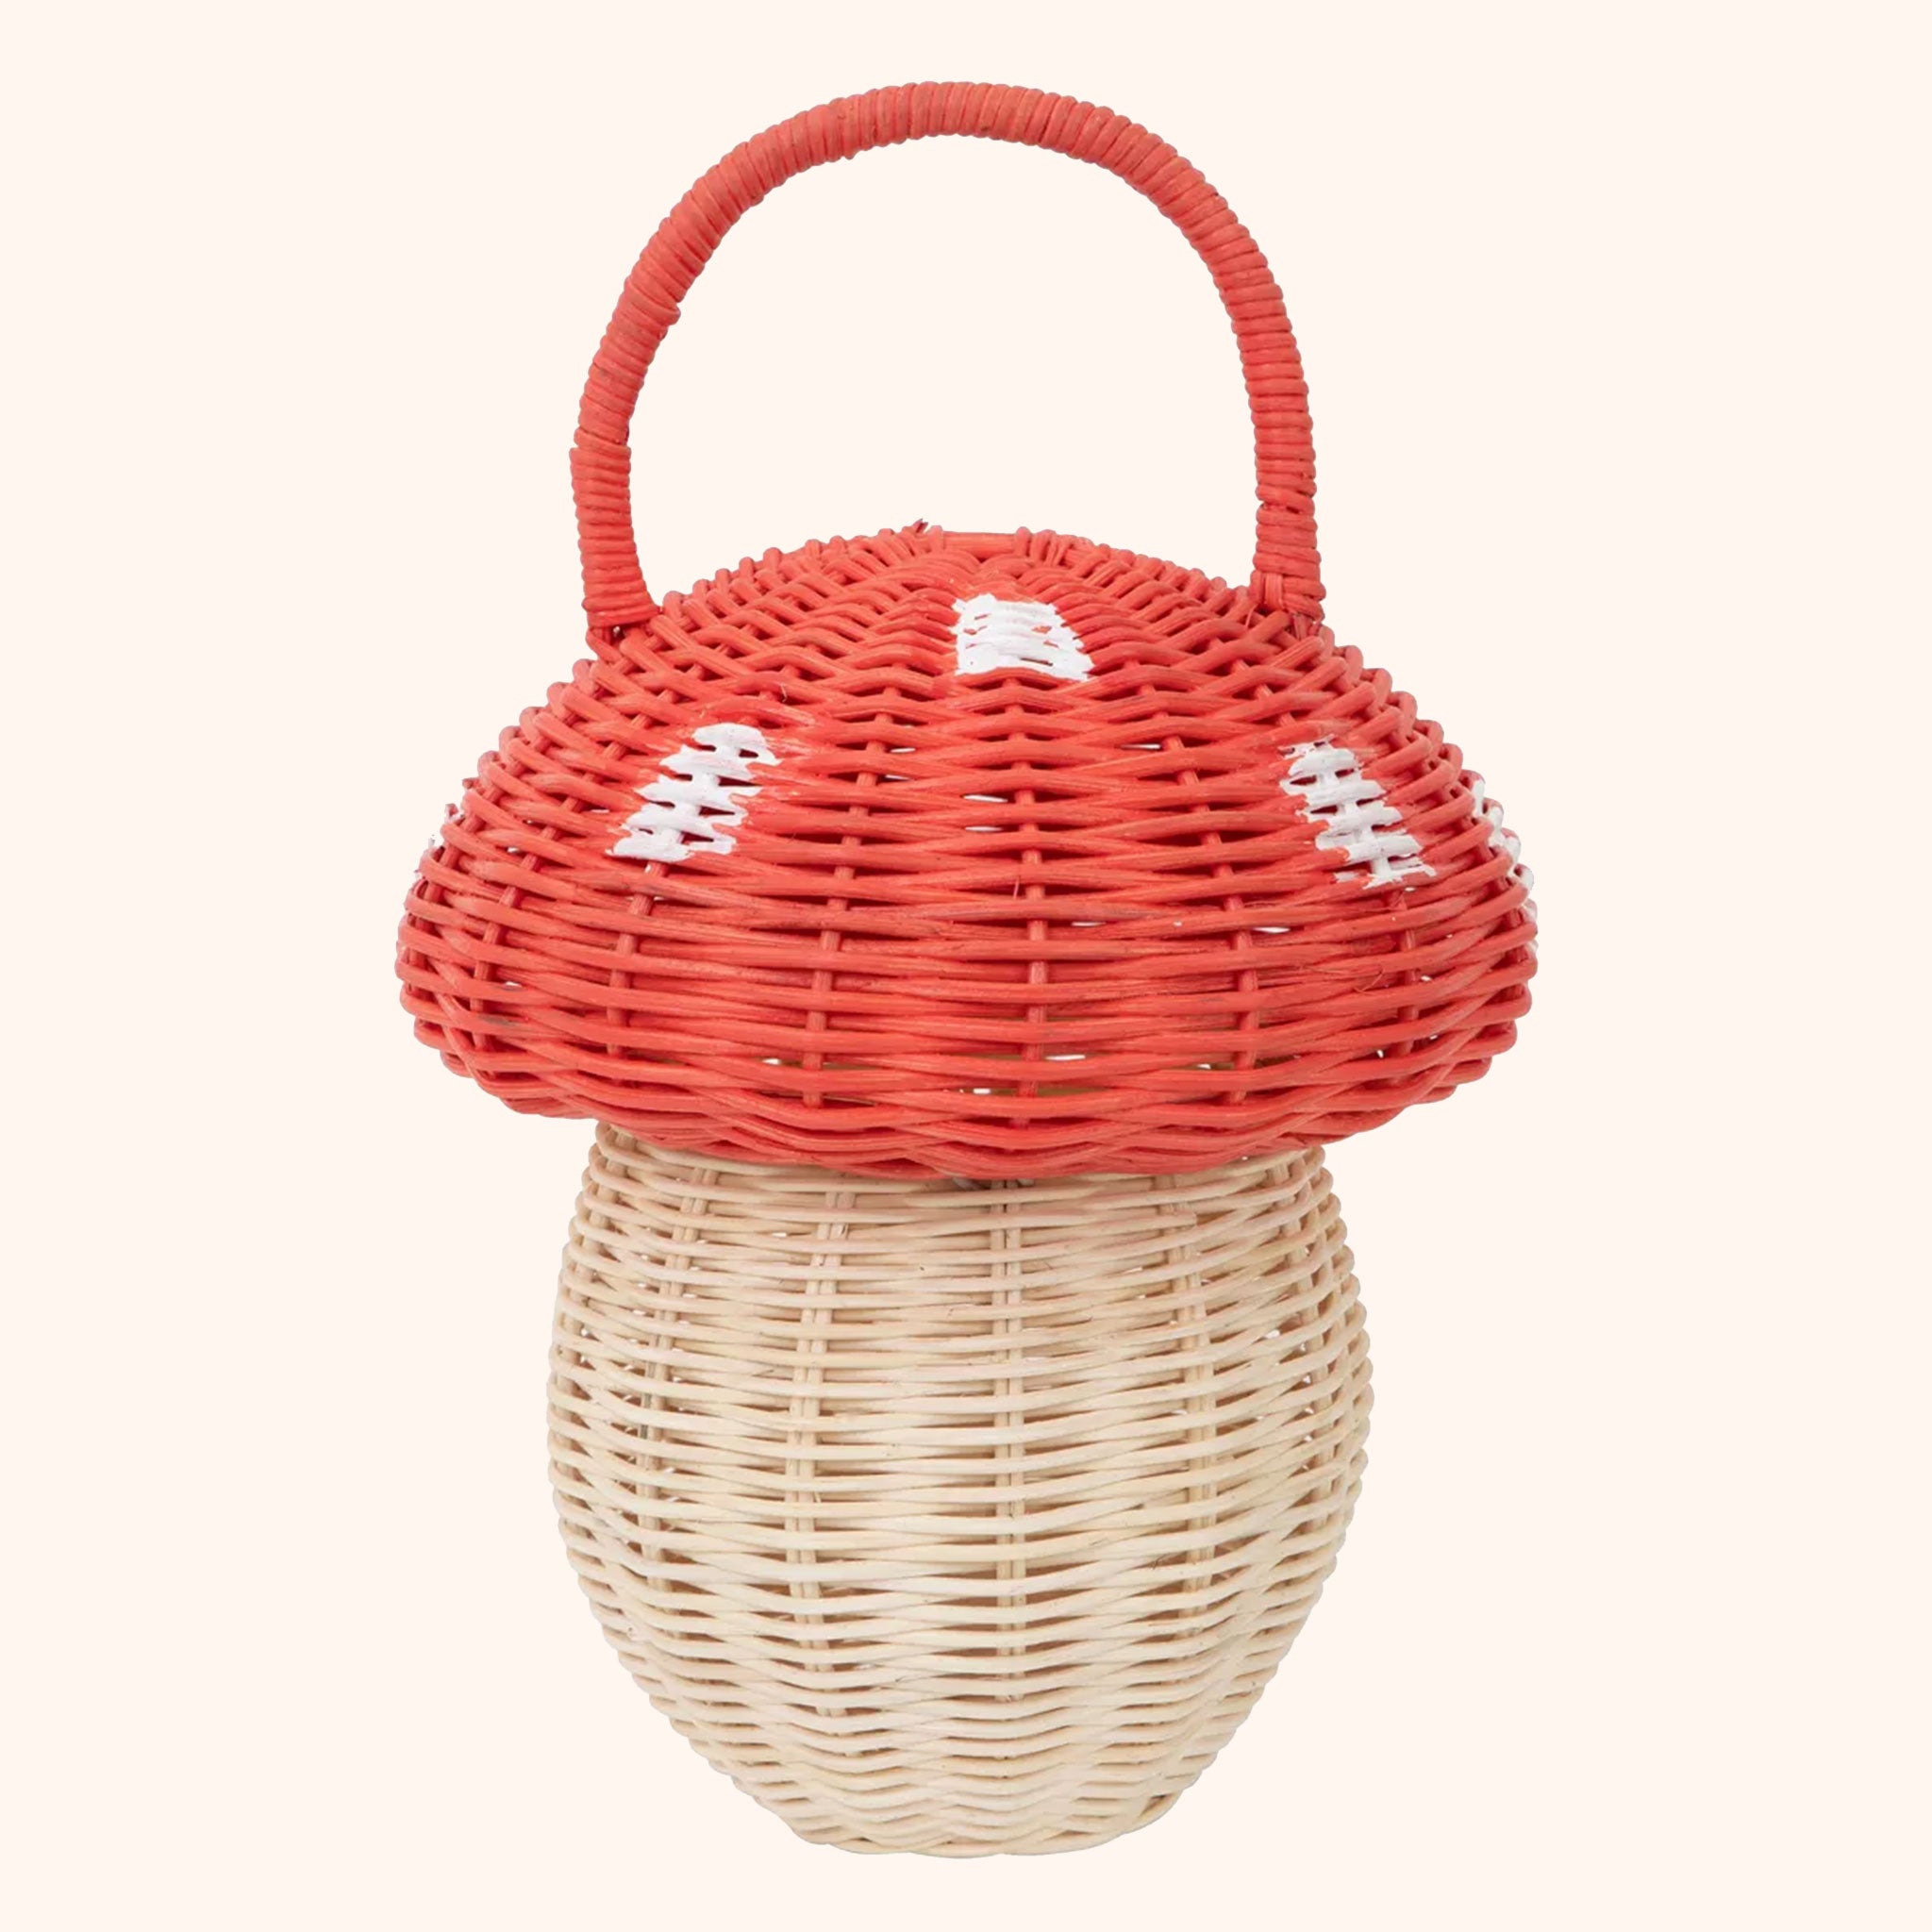 On a white background is a rattan mushroom basket for children with a red and white spotted top and natural rattan colored bottom. 